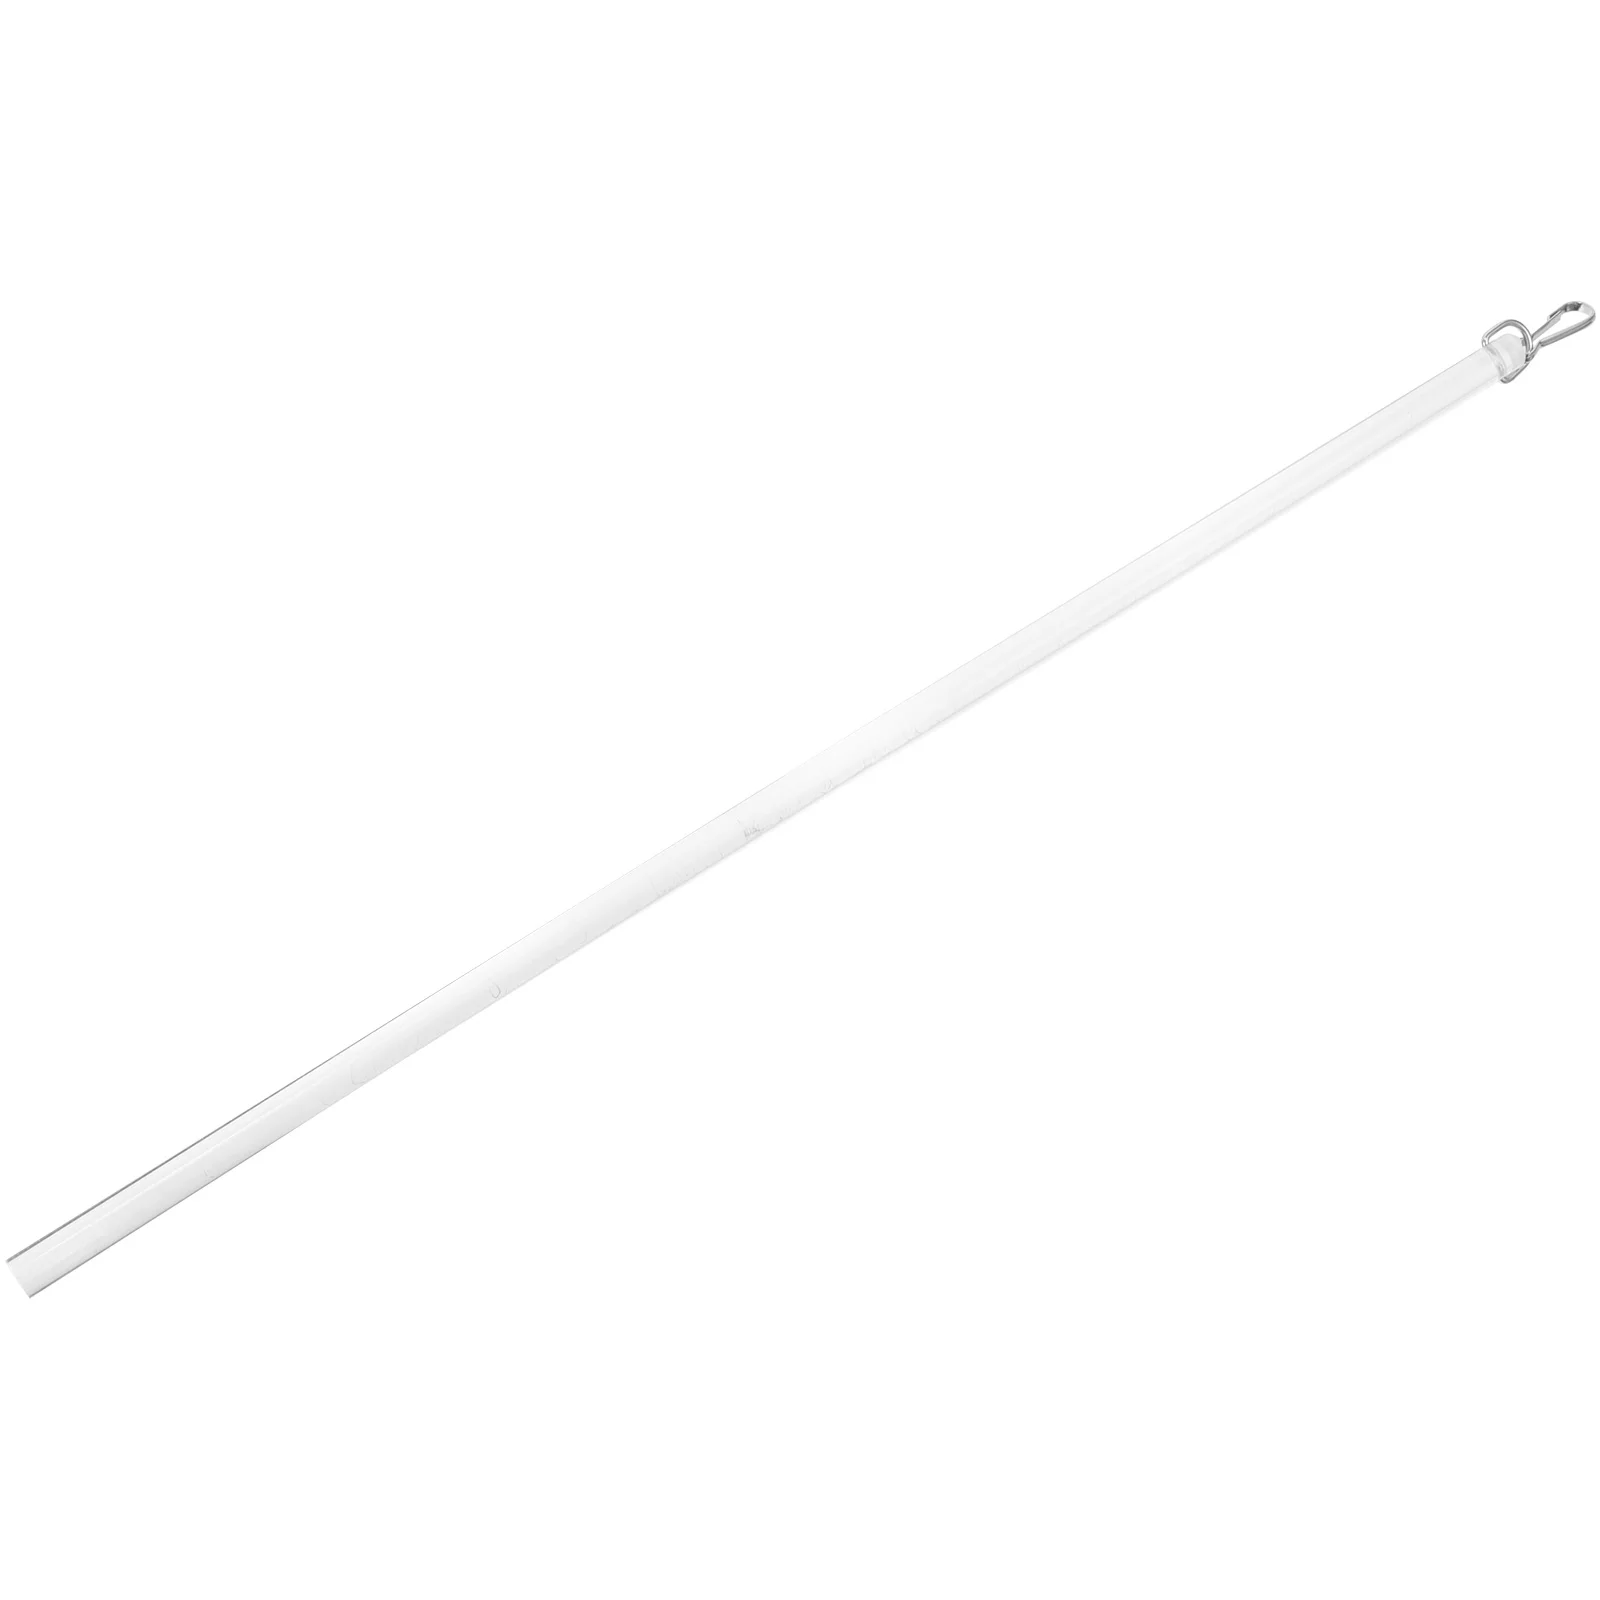 

White Drapes Drapery Wand Curtain Pull Rod Blind Replacement Repair Window Opener Pole Rods Acrylic Wands Curtains